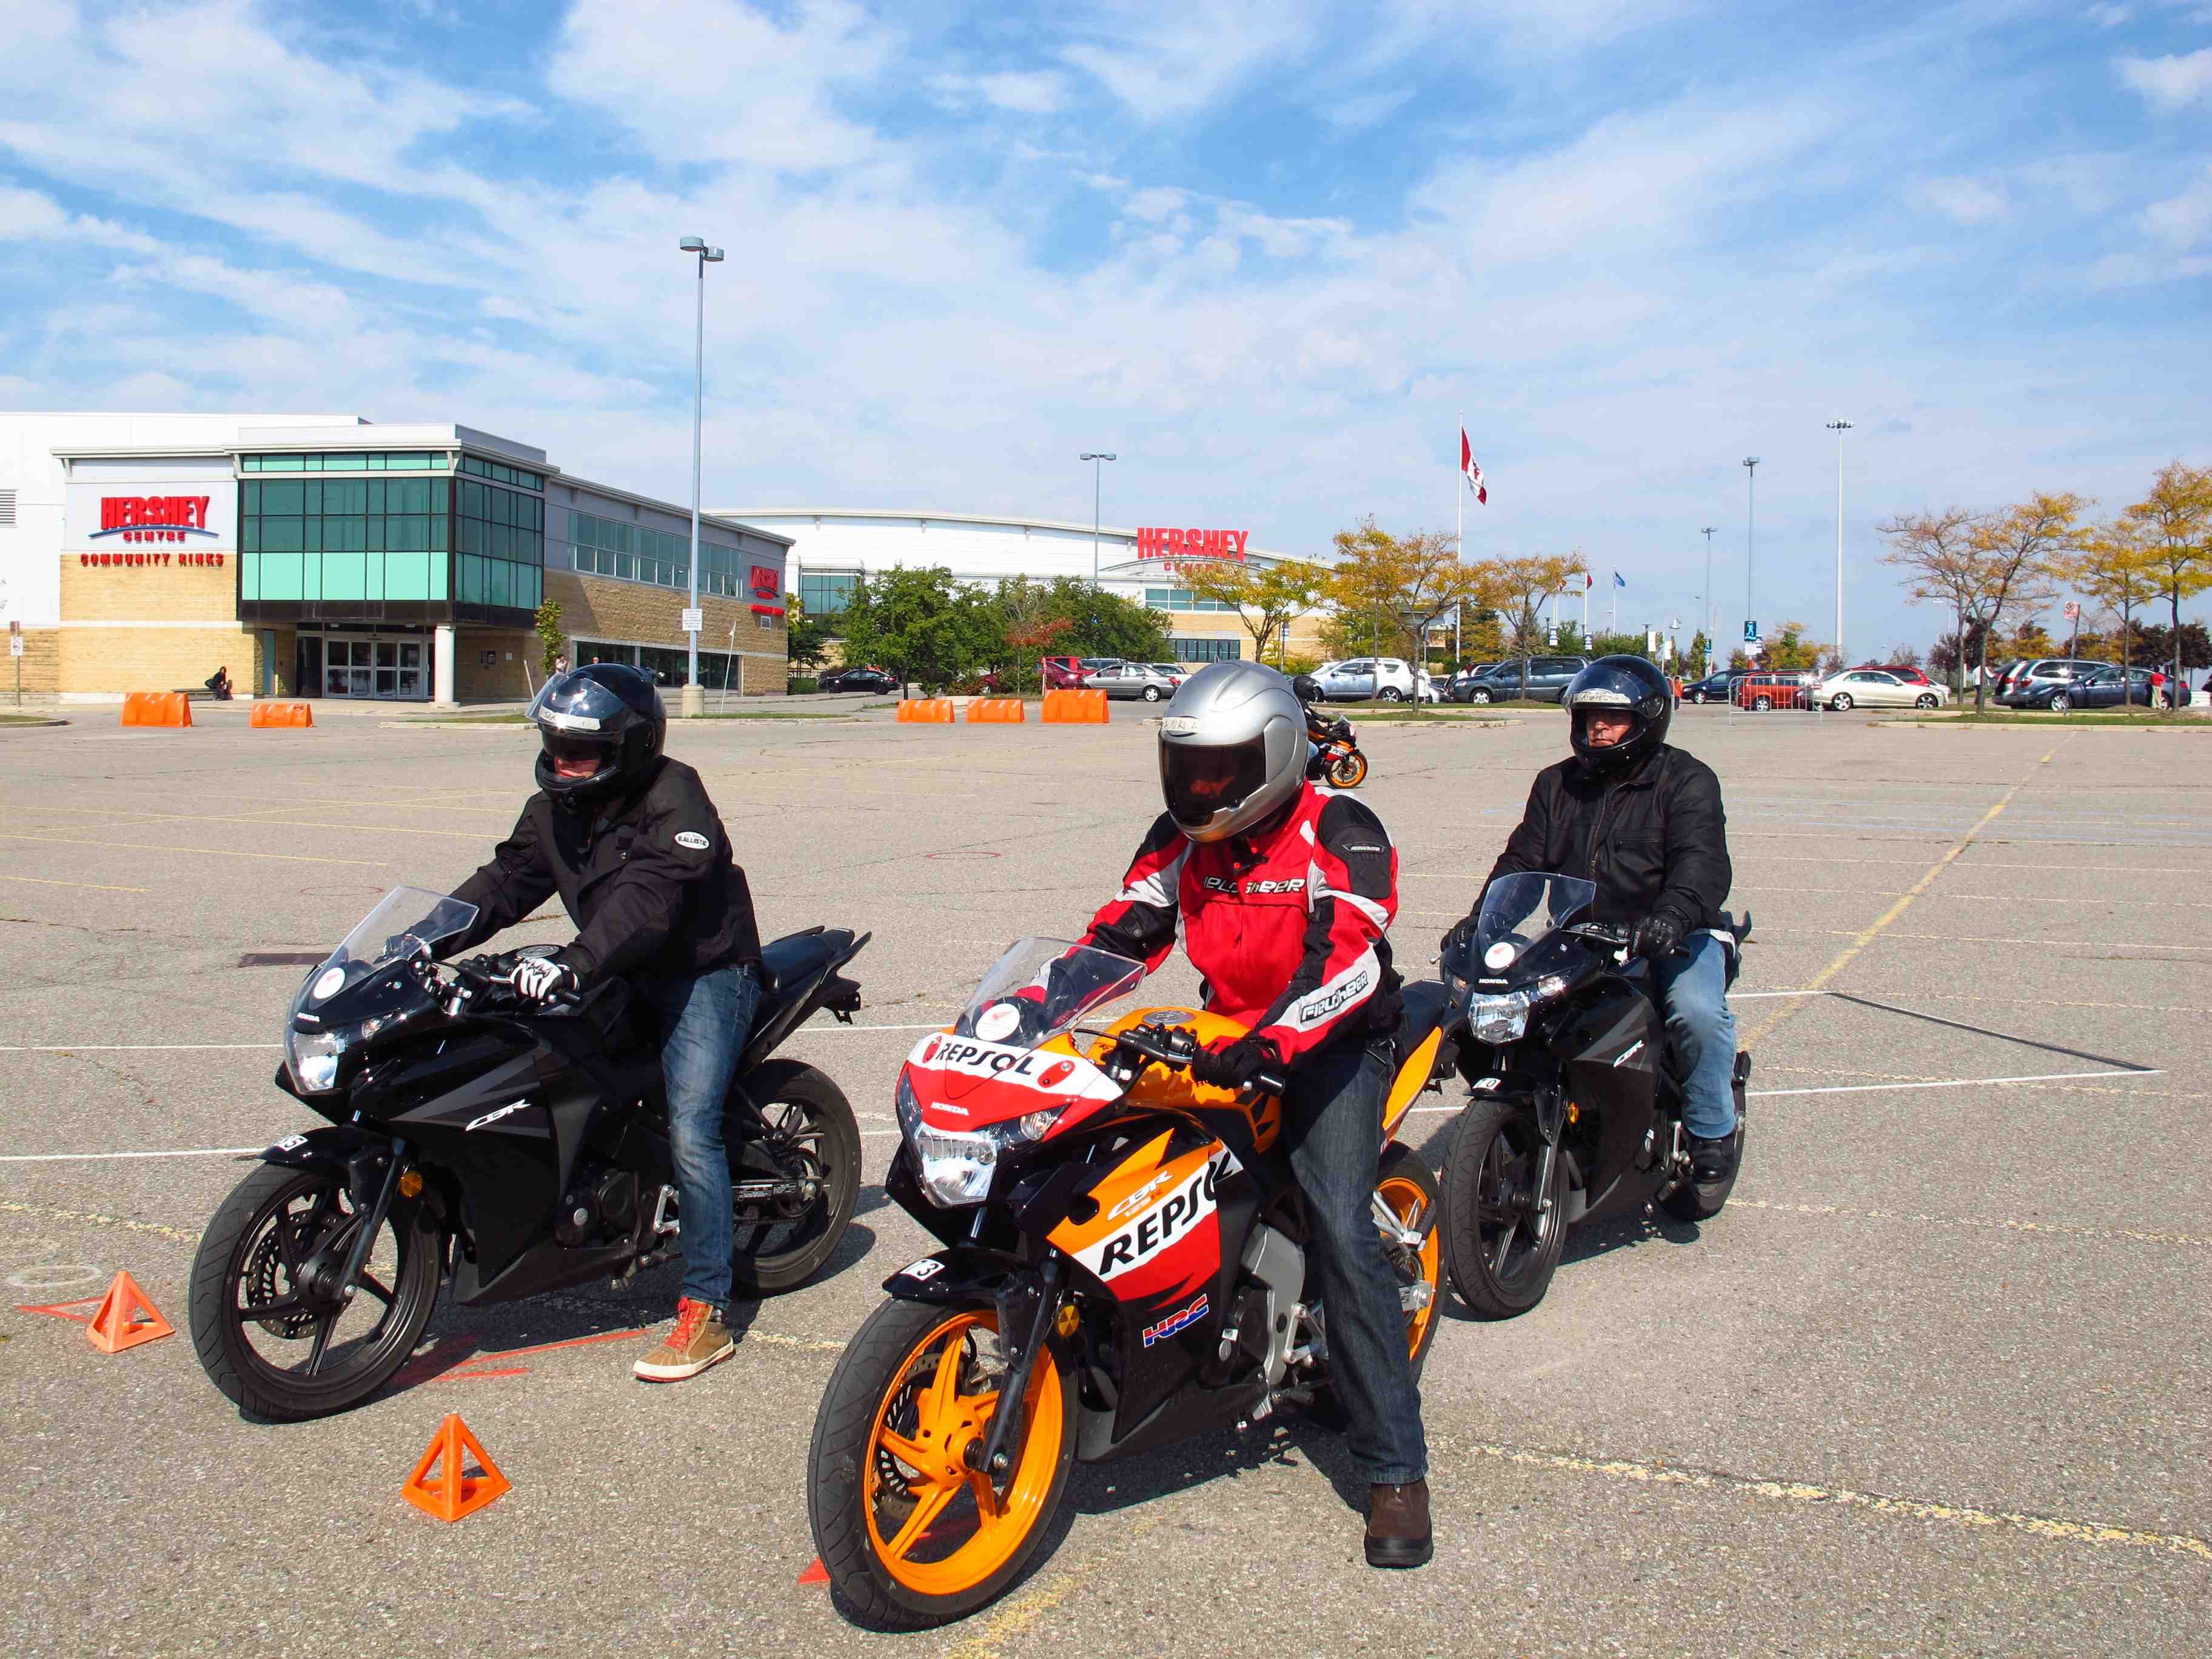 What are some motorcycle training courses?